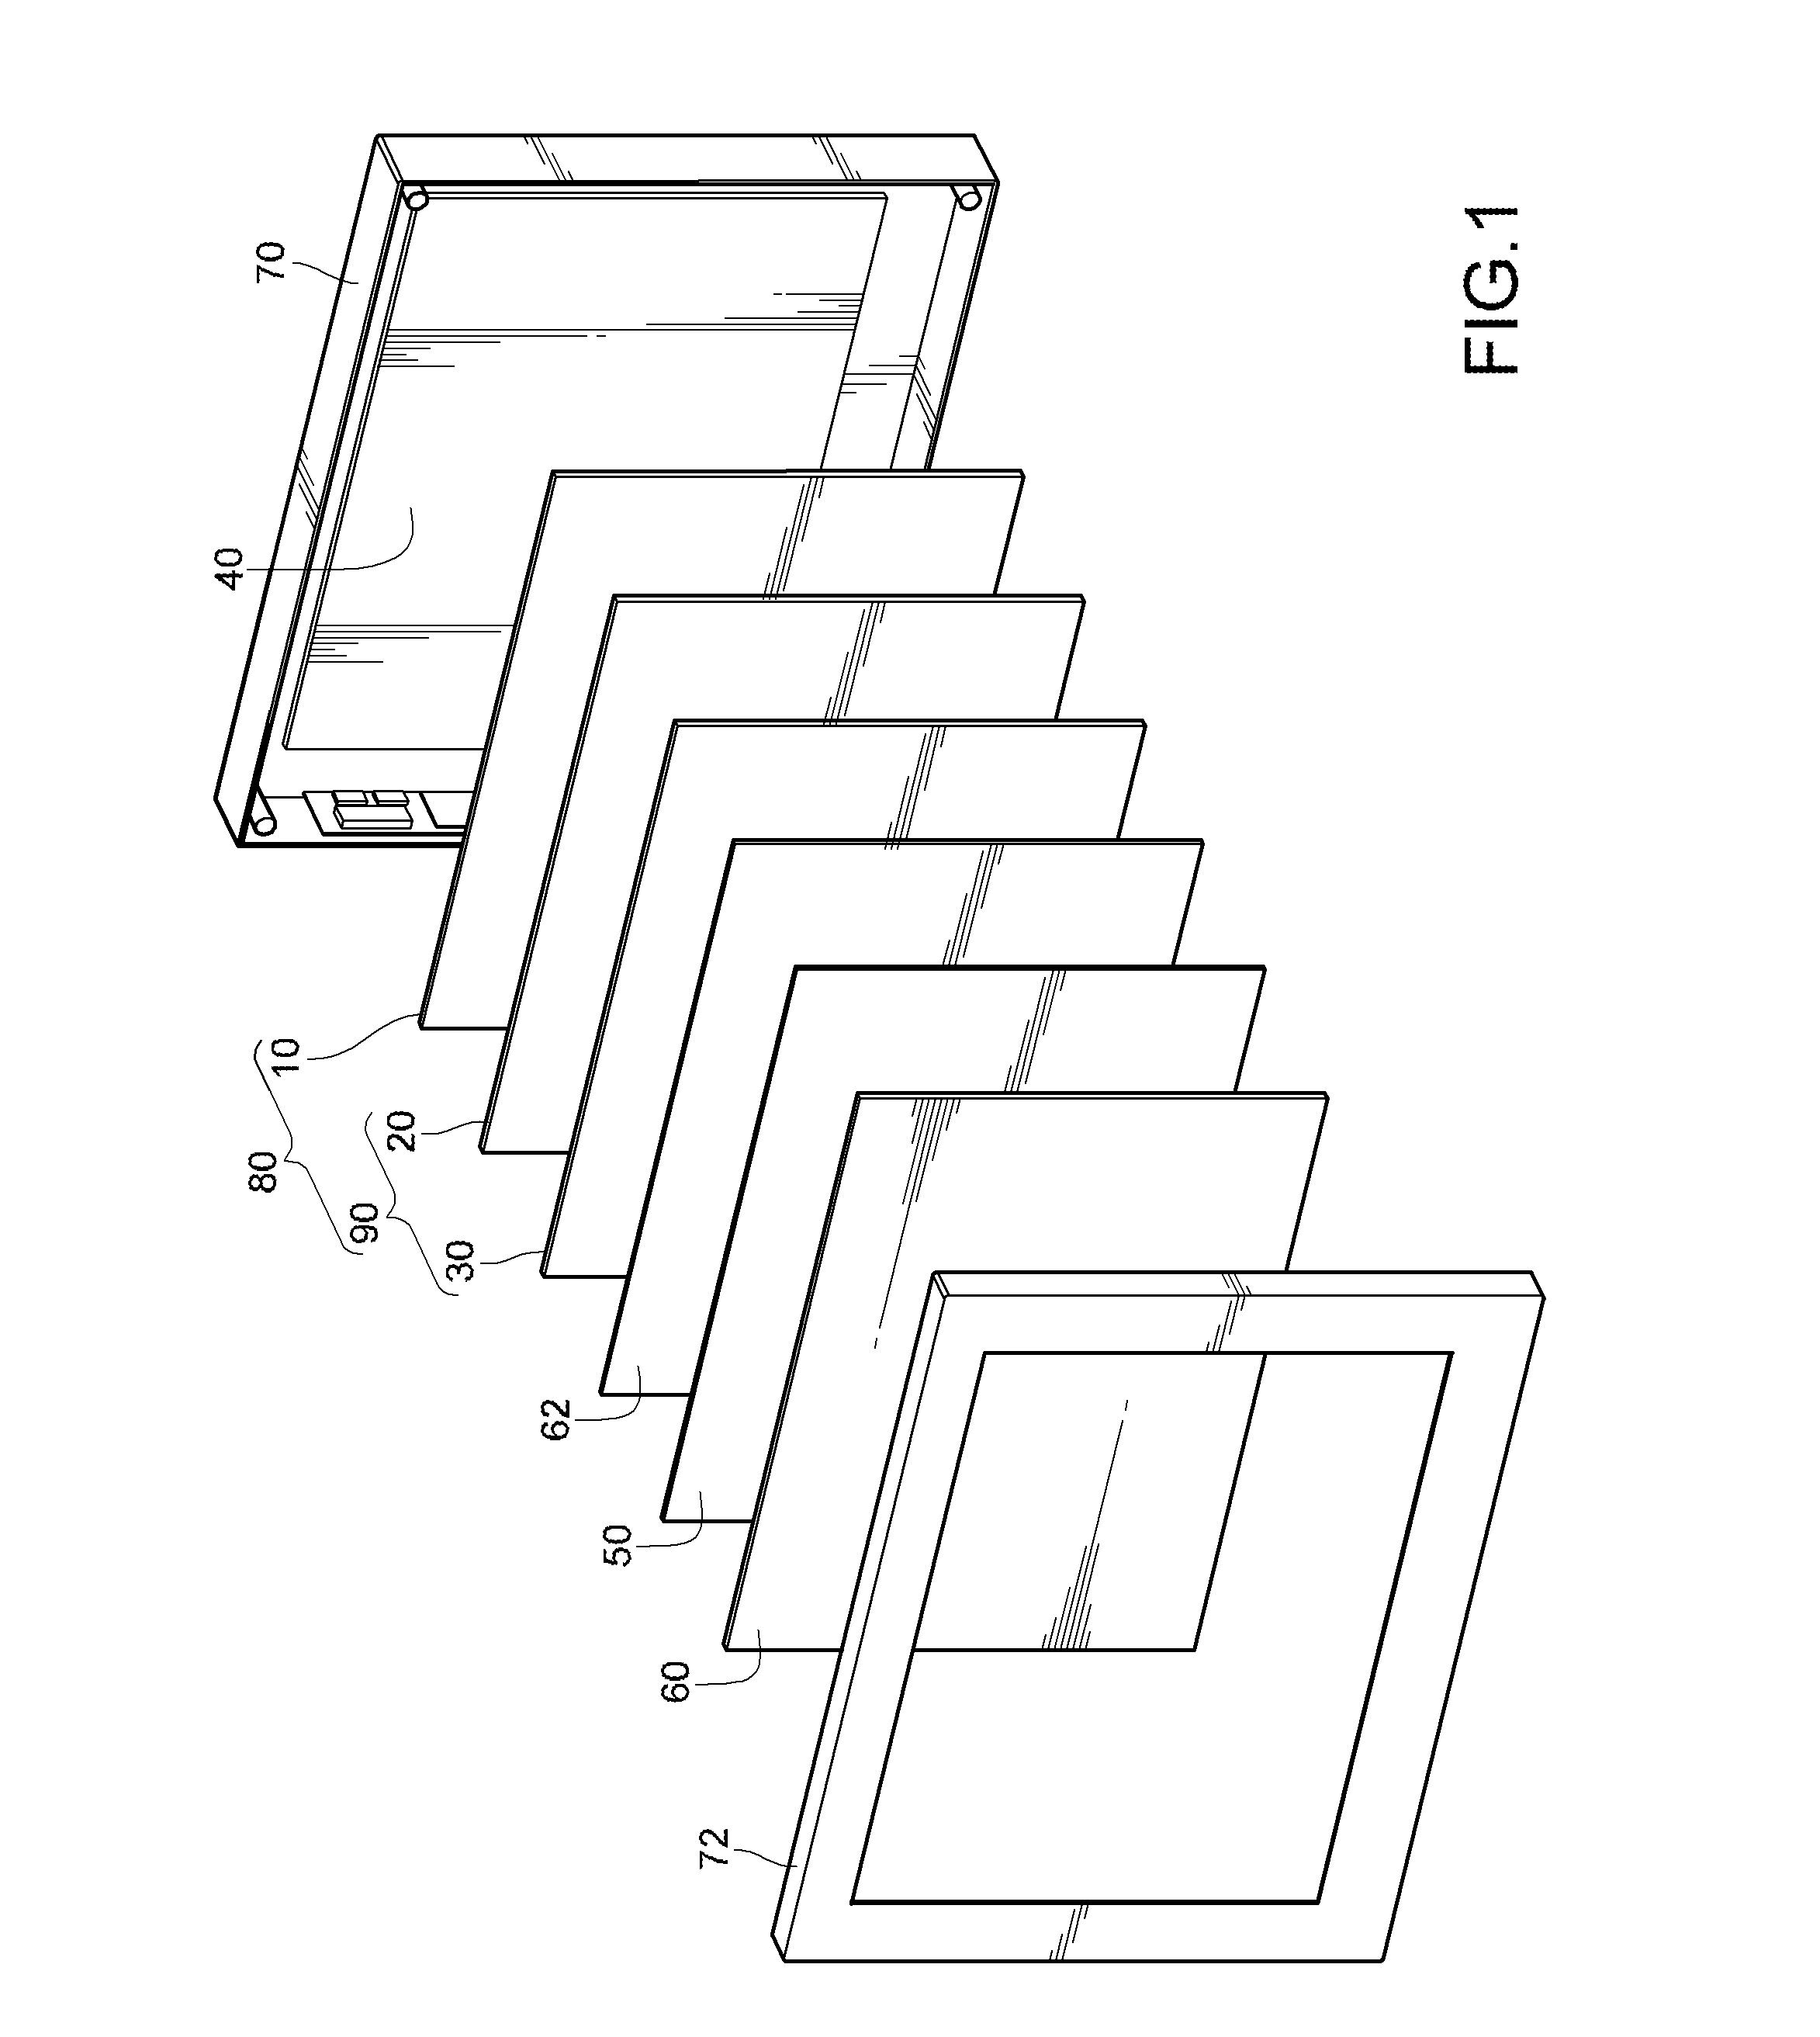 Auto-stereoscopic multi-dimensional display component and display thereof